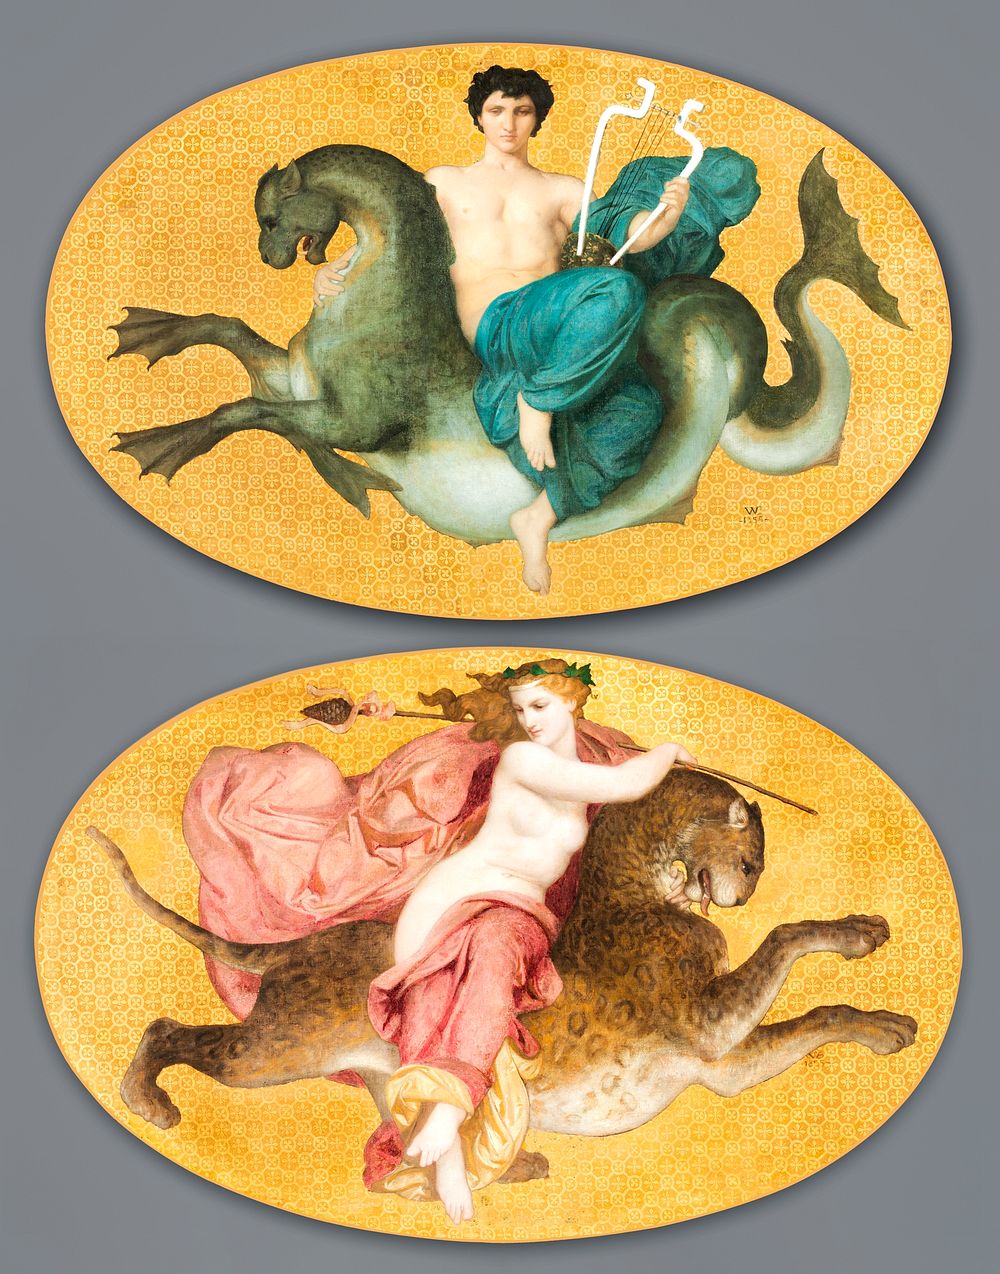 Arion on a Sea Horse and Bacchante on a Panther (pair) (1885) by William Adolphe Bouguereau. Original from The Cleveland…